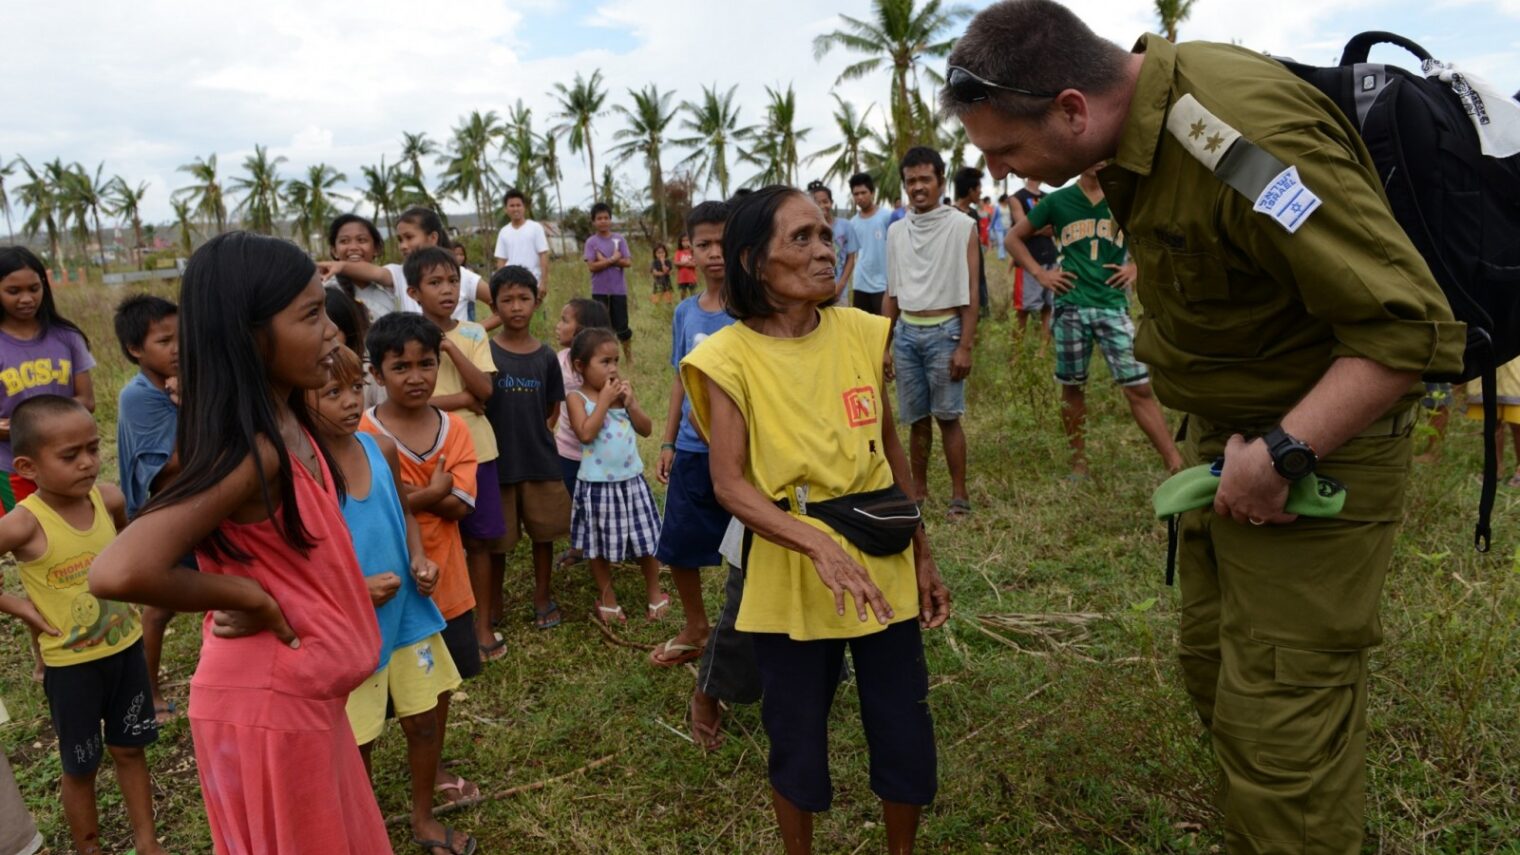 The IDF giving aid in the Philippines in the wake of  the Typhoon. Photo courtesy of IDF